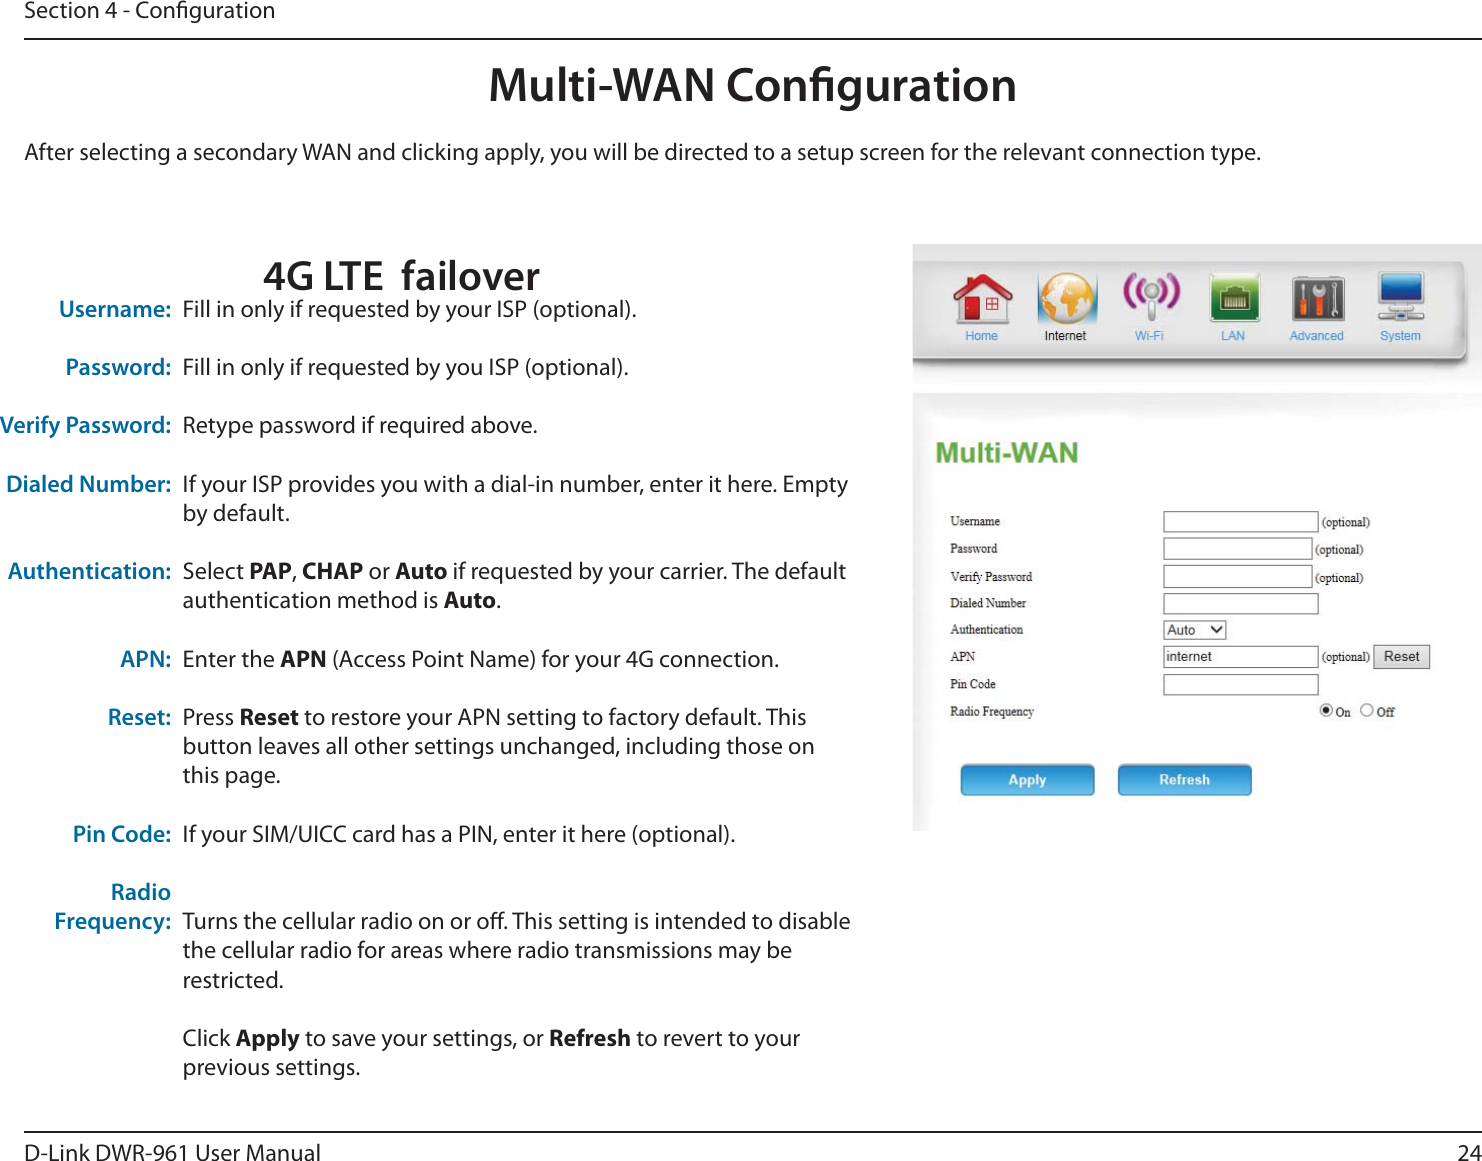 24D-Link DWR-9 User ManualSection 4 - CongurationMulti-WAN CongurationFill in only if requested by your ISP (optional).Fill in only if requested by you ISP (optional).Retype password if required above.If your ISP provides you with a dial-in number, enter it here. Empty by default.Select PAP, CHAP or Auto if requested by your carrier. The default authentication method is Auto.Enter the APN (Access Point Name) for your 4G connection.Press Reset to restore your APN setting to factory default. This button leaves all other settings unchanged, including those on this page.If your SIM/UICC card has a PIN, enter it here (optional).Turns the cellular radio on or o. This setting is intended to disable the cellular radio for areas where radio transmissions may be restricted.Click Apply to save your settings, or Refresh to revert to your previous settings.Username:Password:Verify Password:Dialed Number:Authentication:APN:Reset:Pin Code:Radio Frequency:After selecting a secondary WAN and clicking apply, you will be directed to a setup screen for the relevant connection type.4G LTE  failover